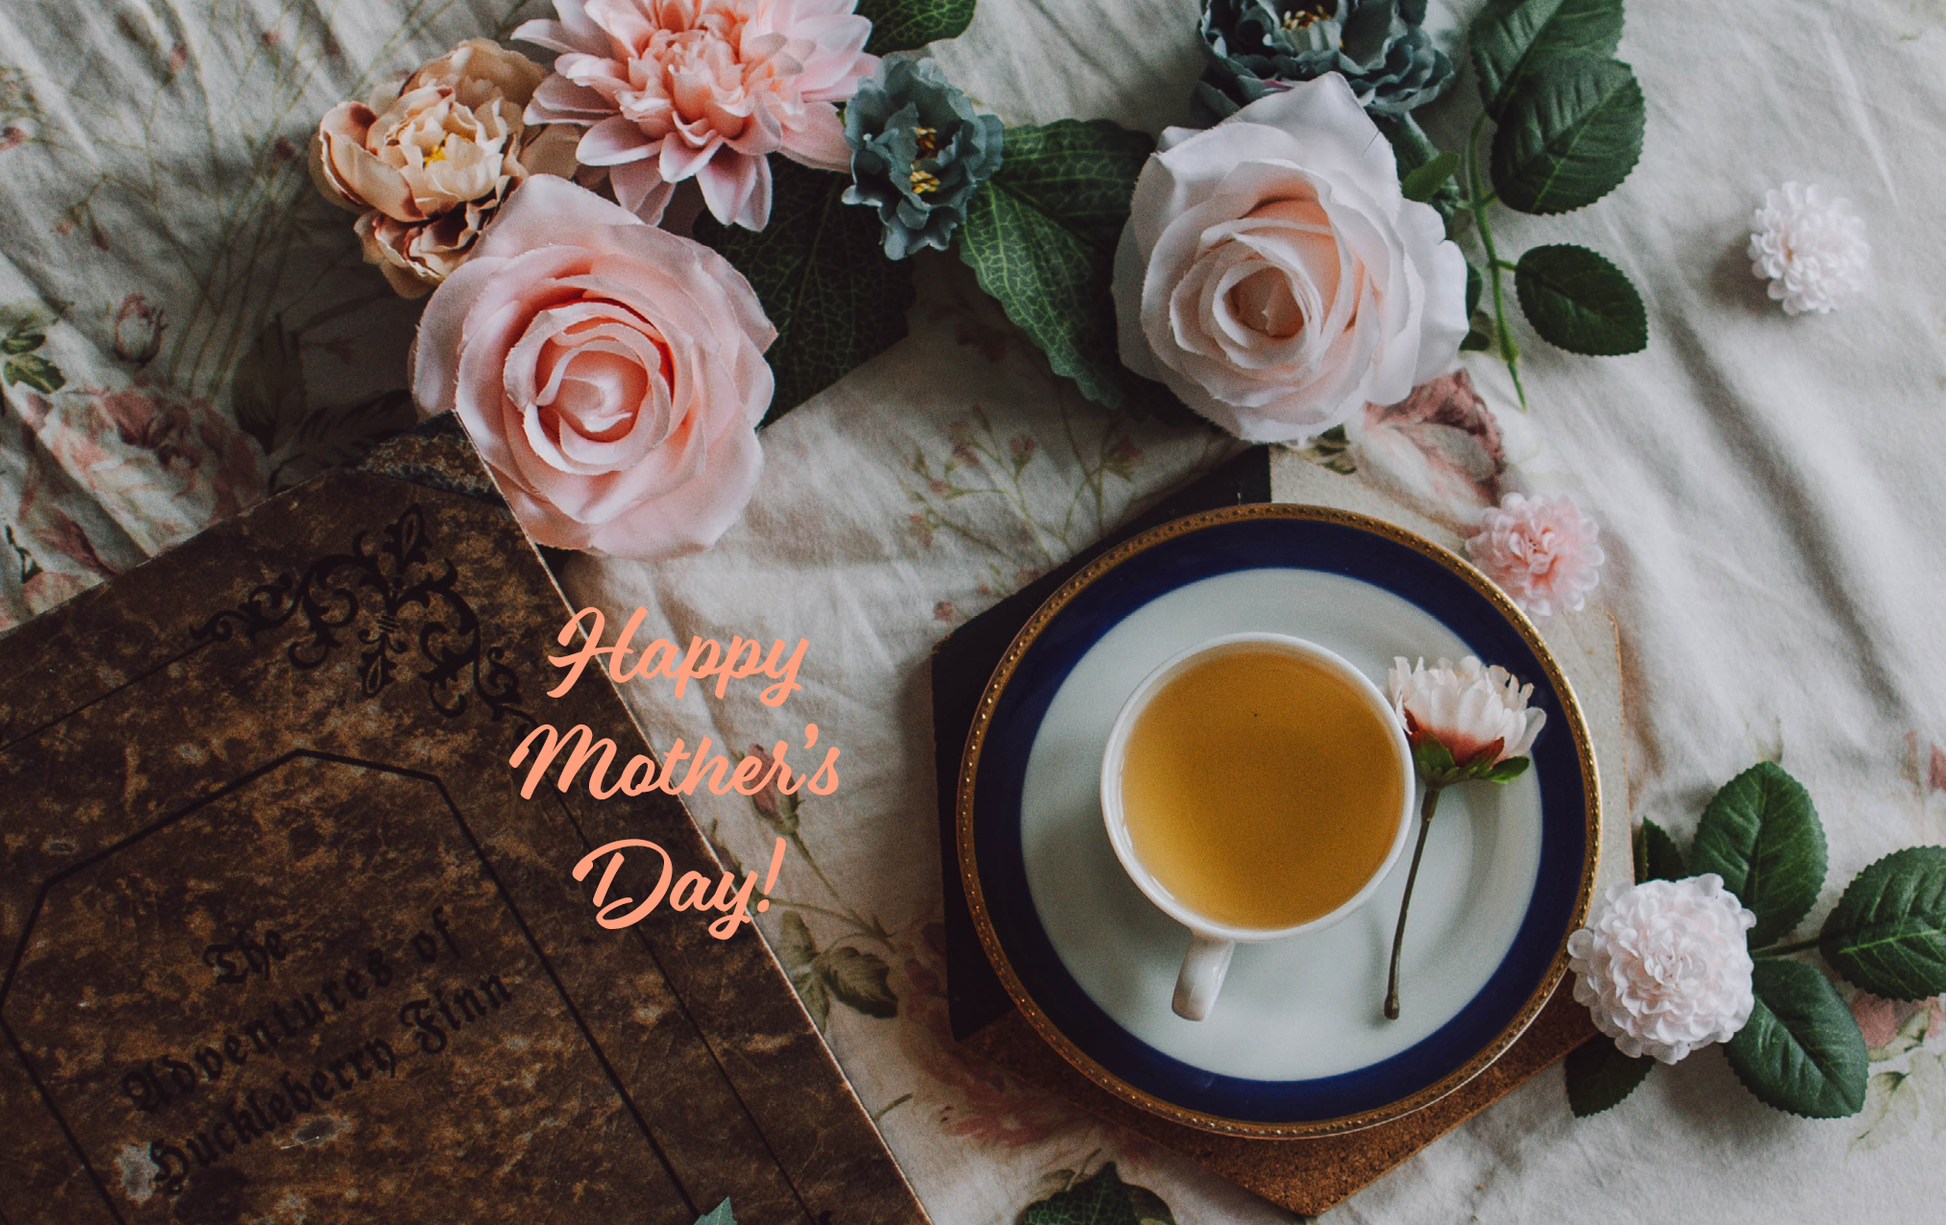 Happy Mother's Day Card & Tea Cup